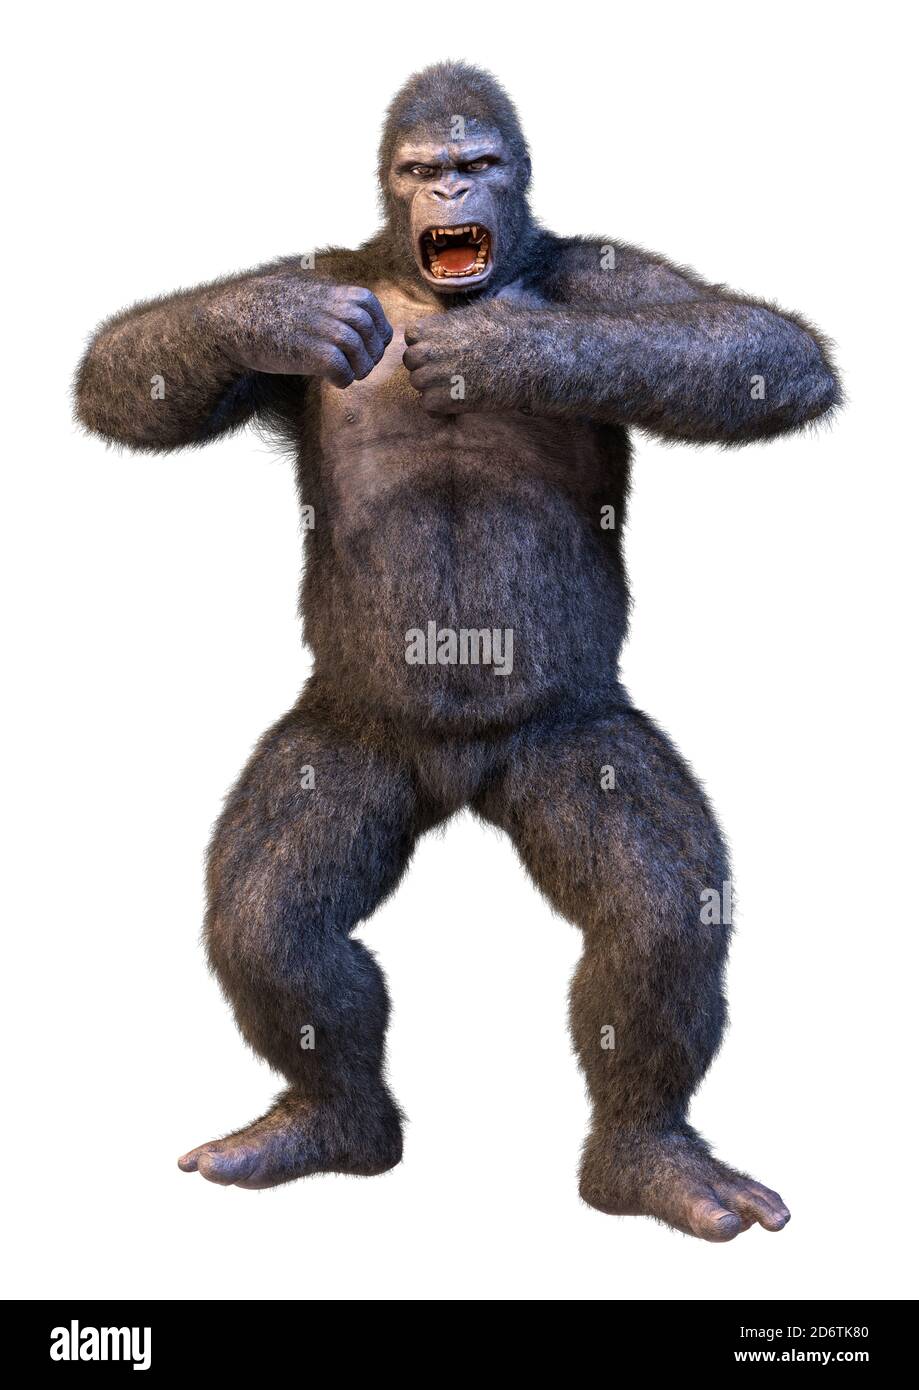 3D rendering of a gorilla ape isolated on white background Stock Photo